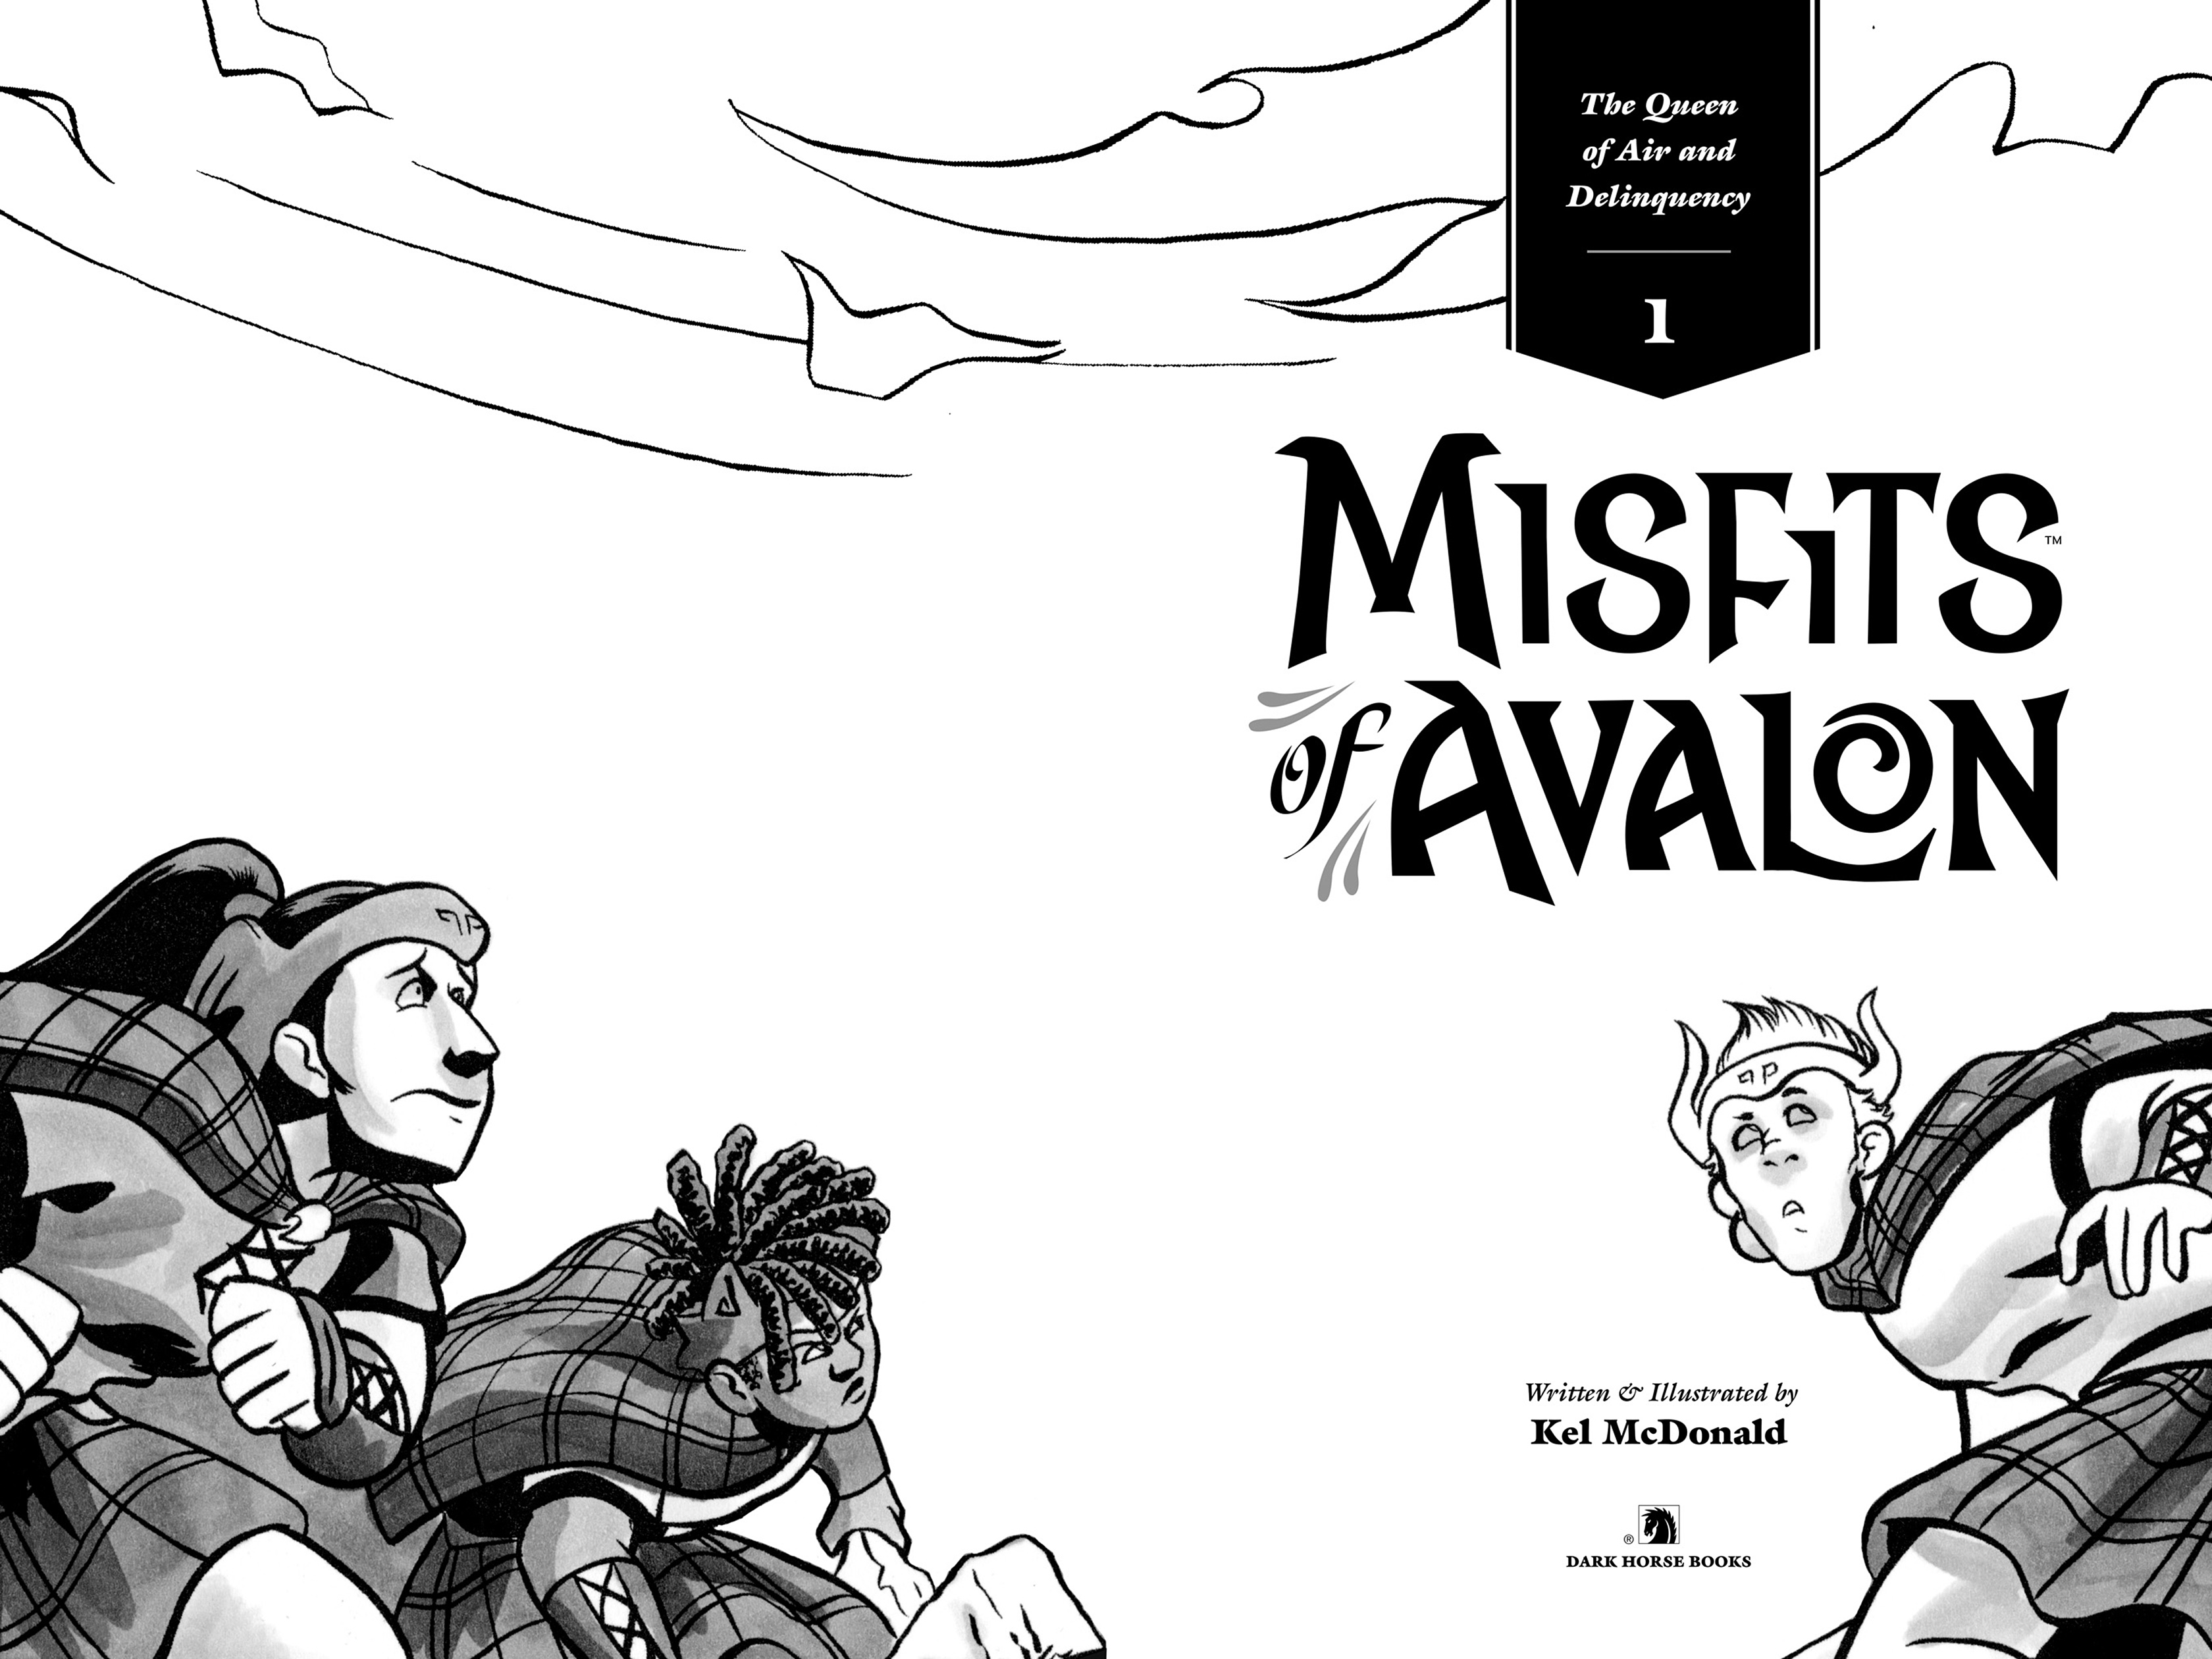 Read online Misfits of Avalon: The Queen of Air and Delinquency comic -  Issue # TPB (Part 1) - 3